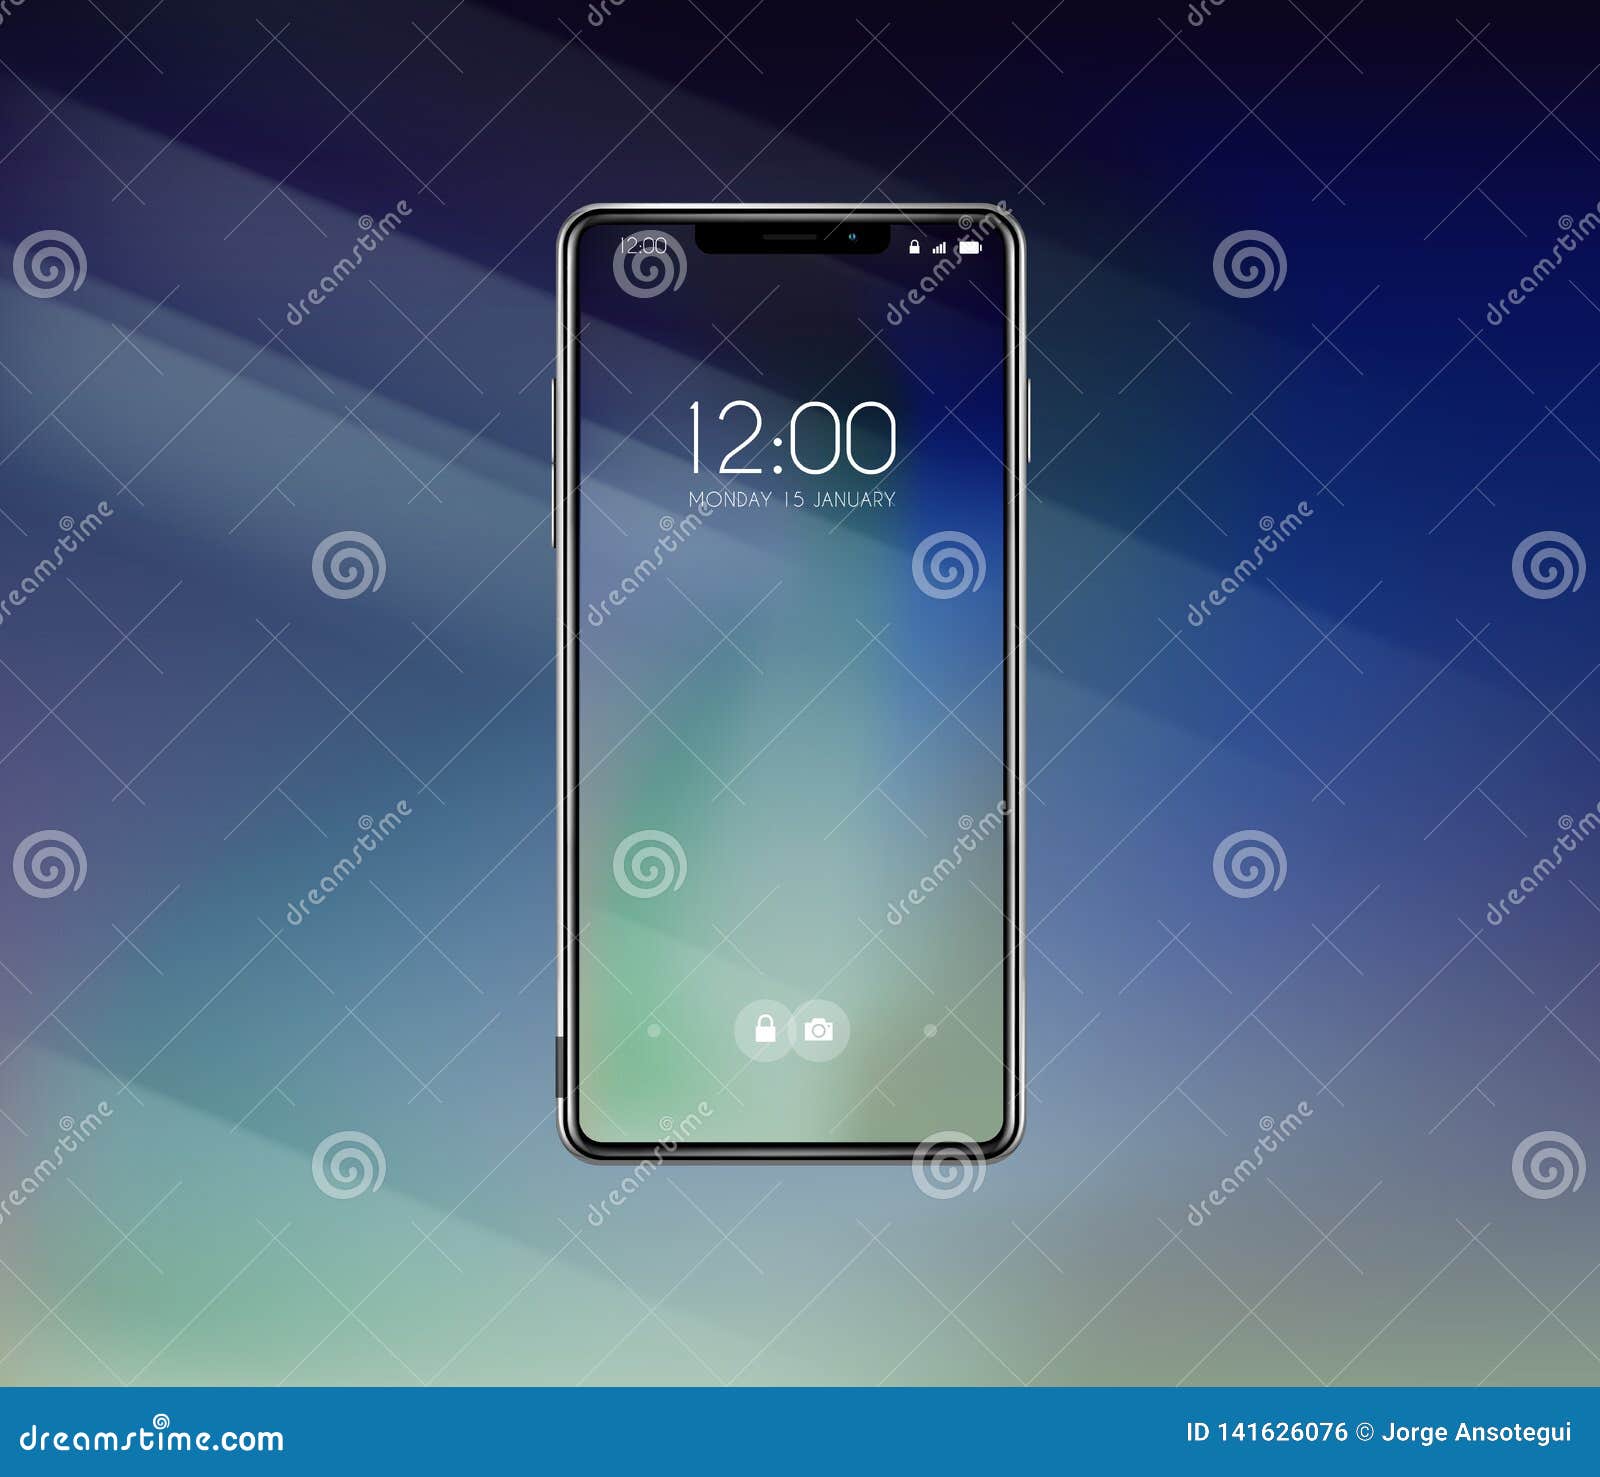 new front smartphone, phone prototype with advertisment background. mobile with background and hour screen. mockup model for add,